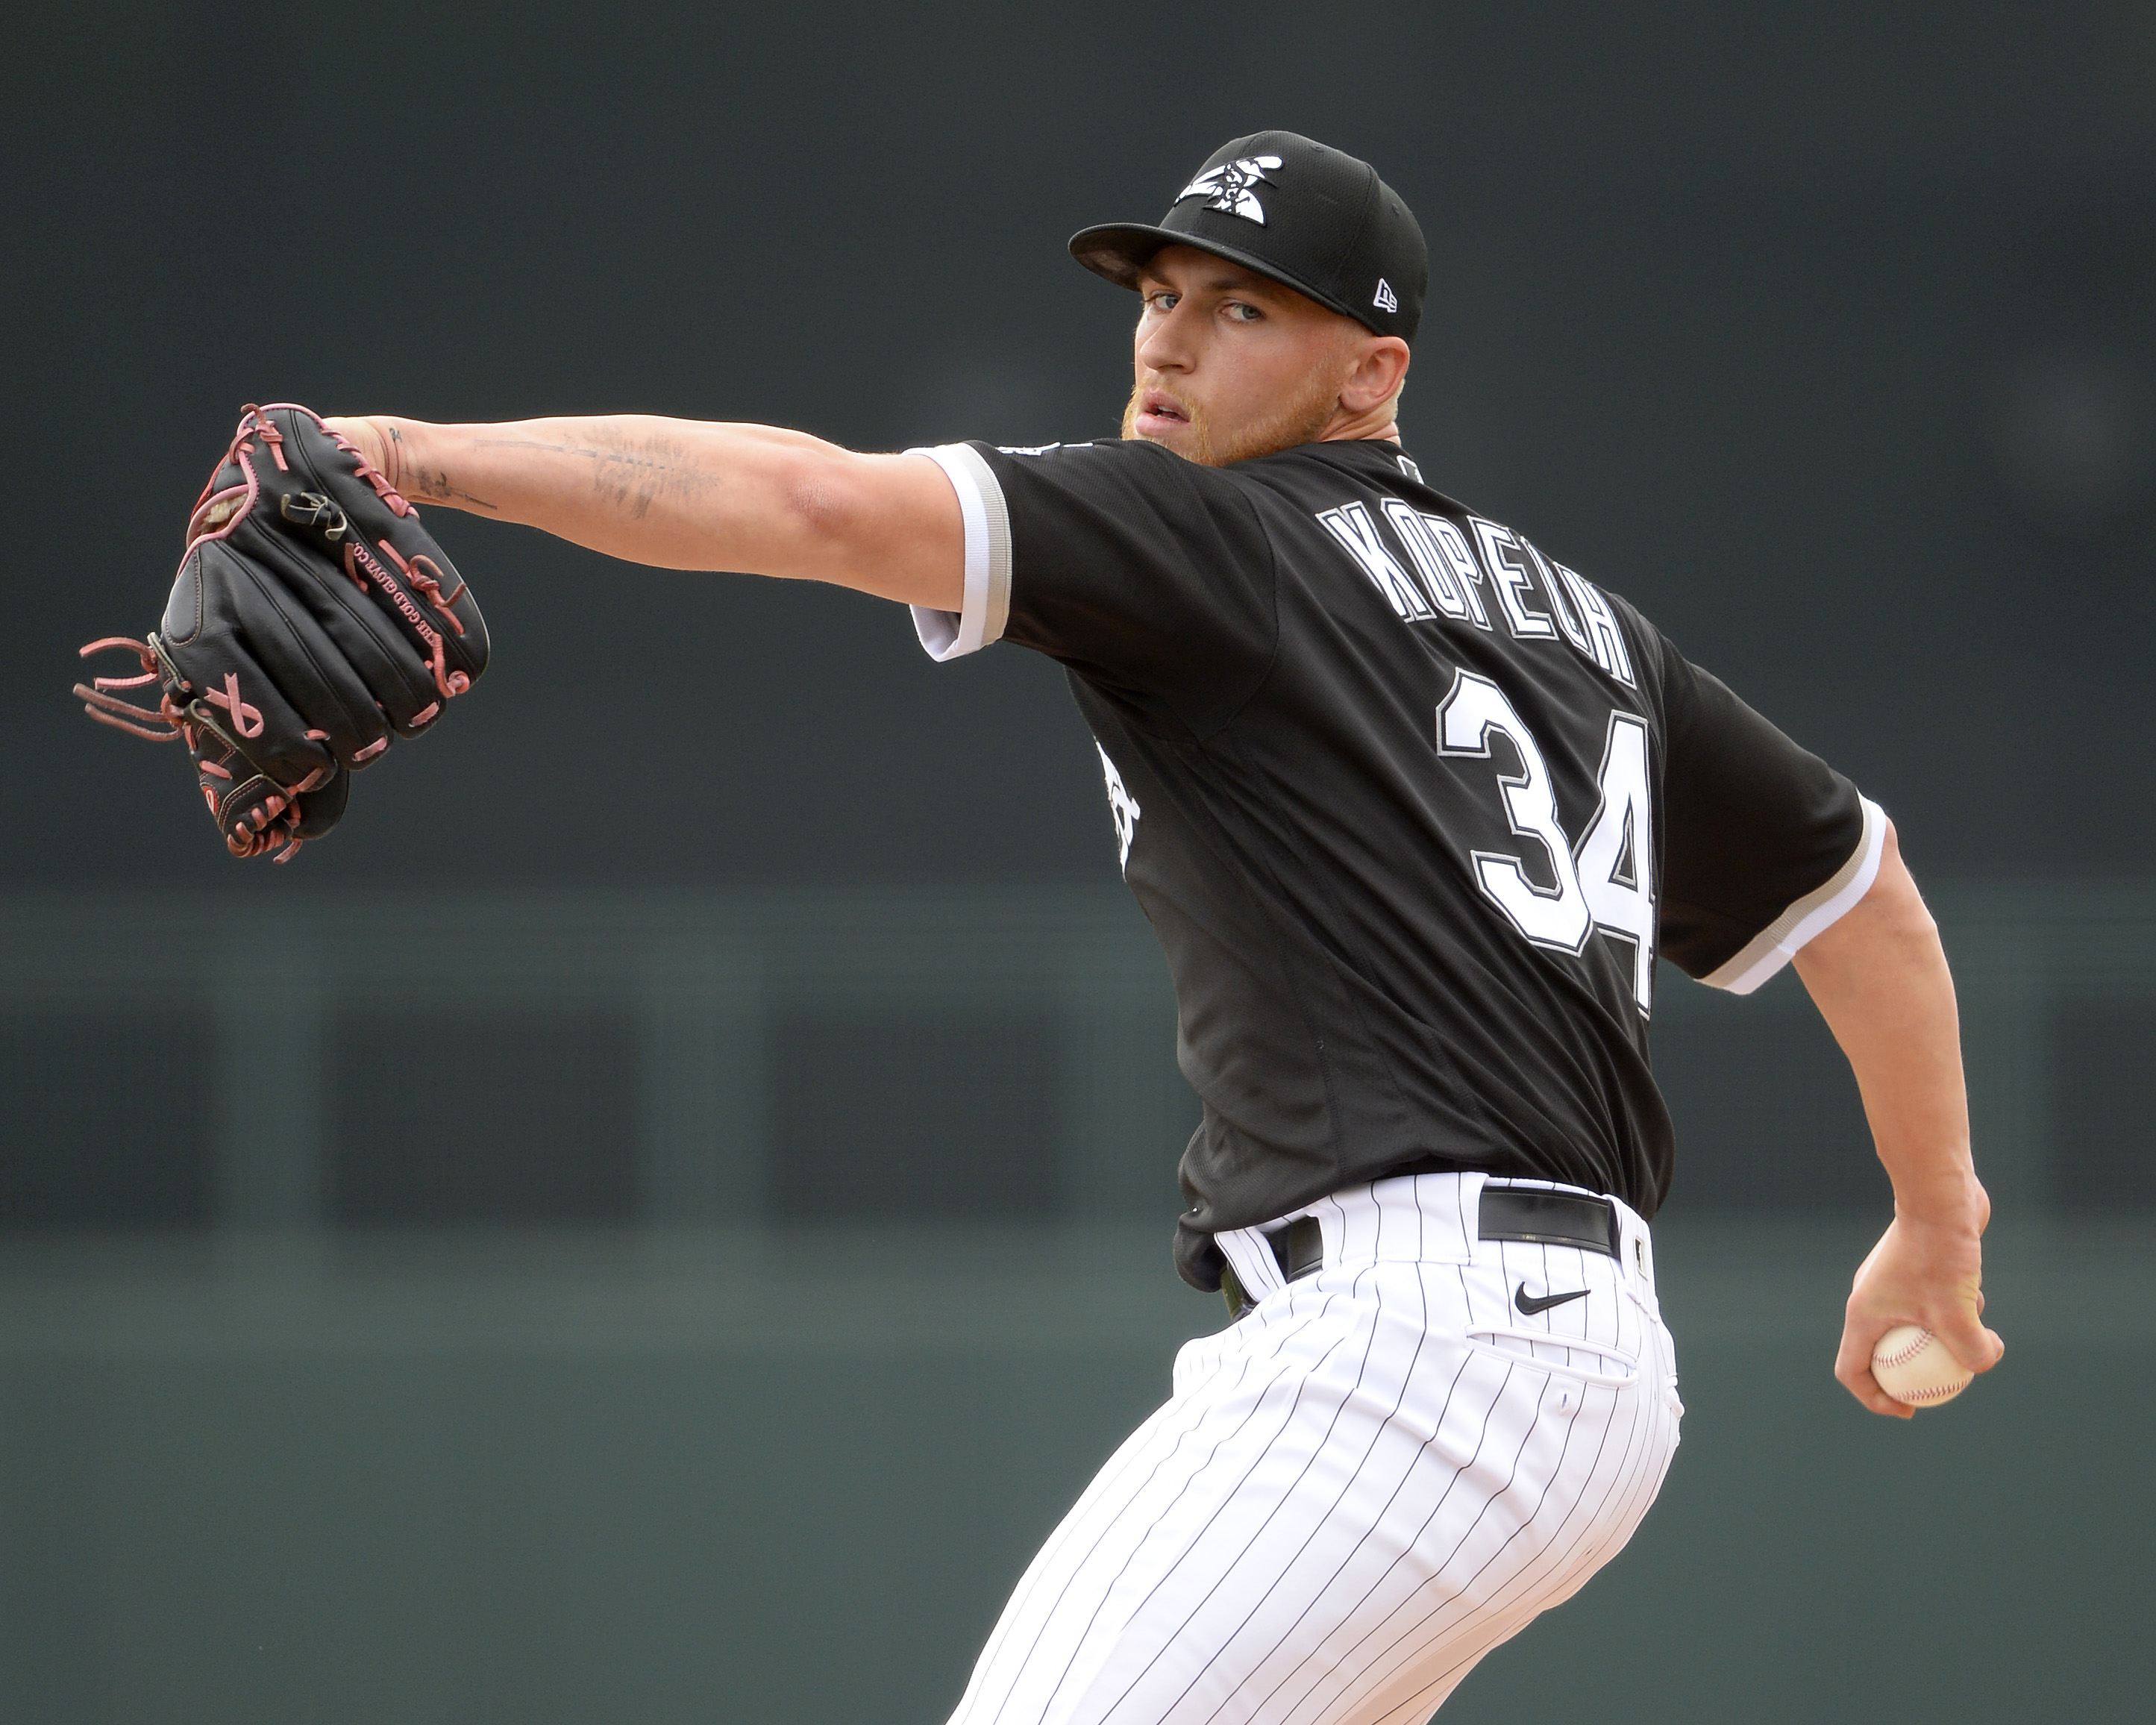 Michael Kopech of the Chicago White Sox